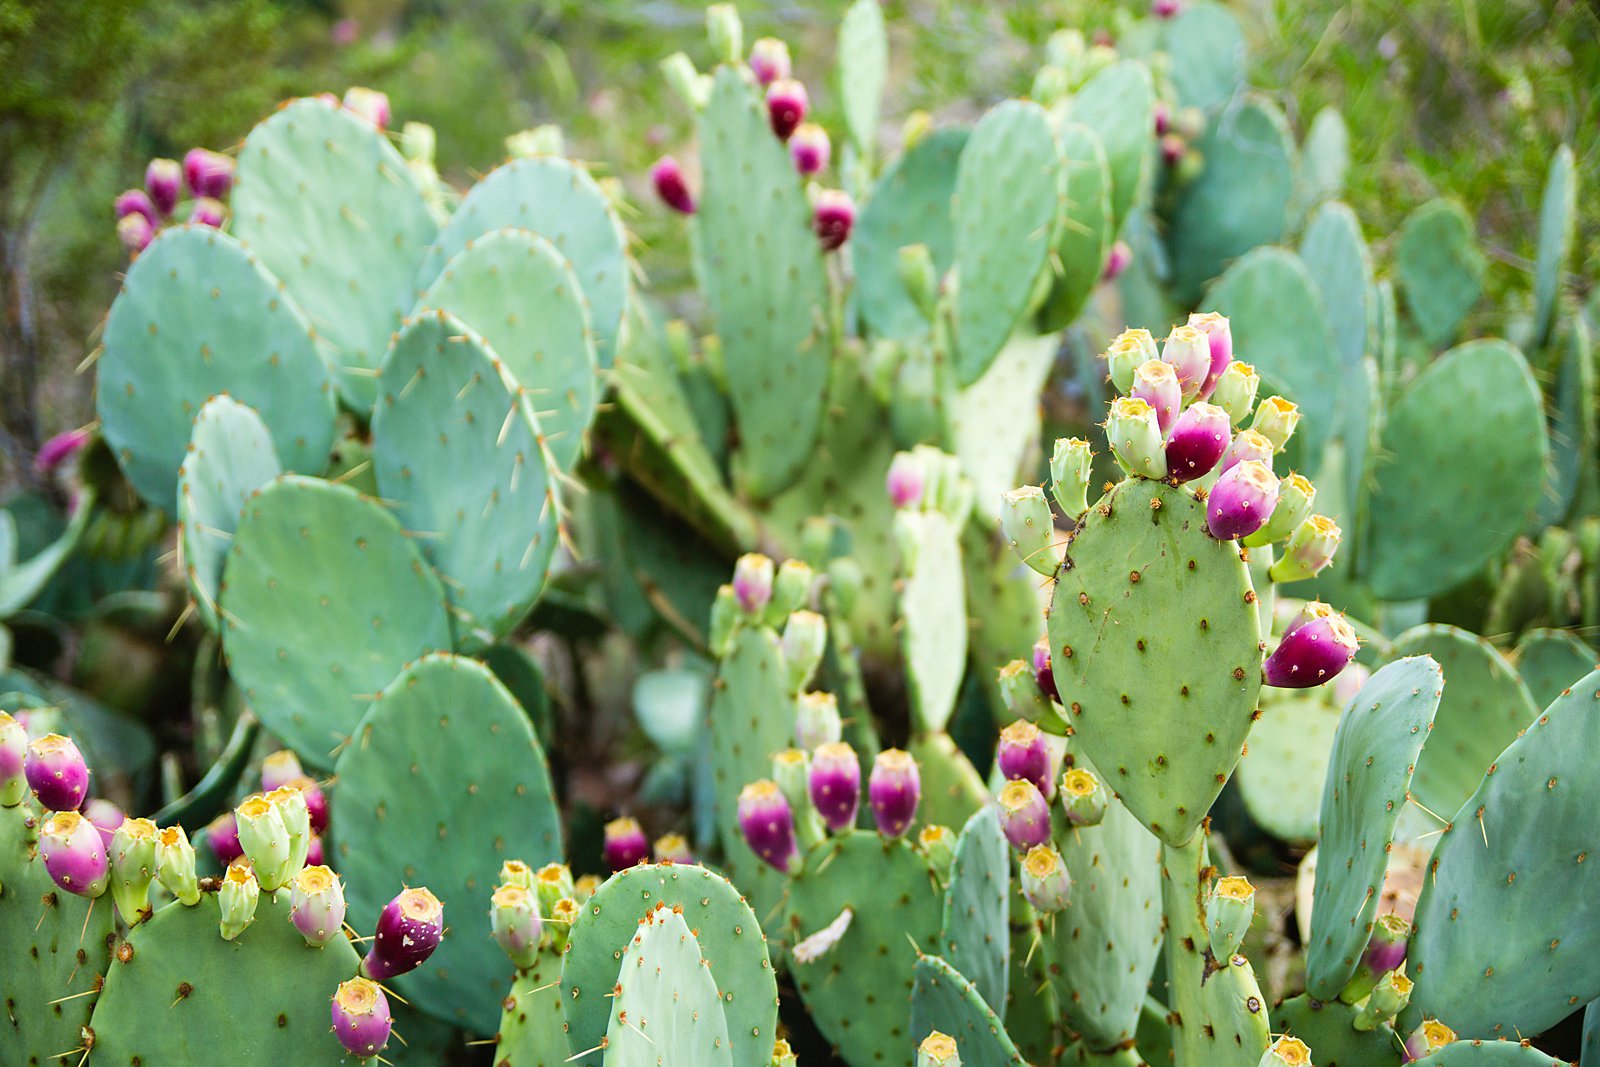 Prickly pear cactus at Veterans Oasis Park by PMA Photography.